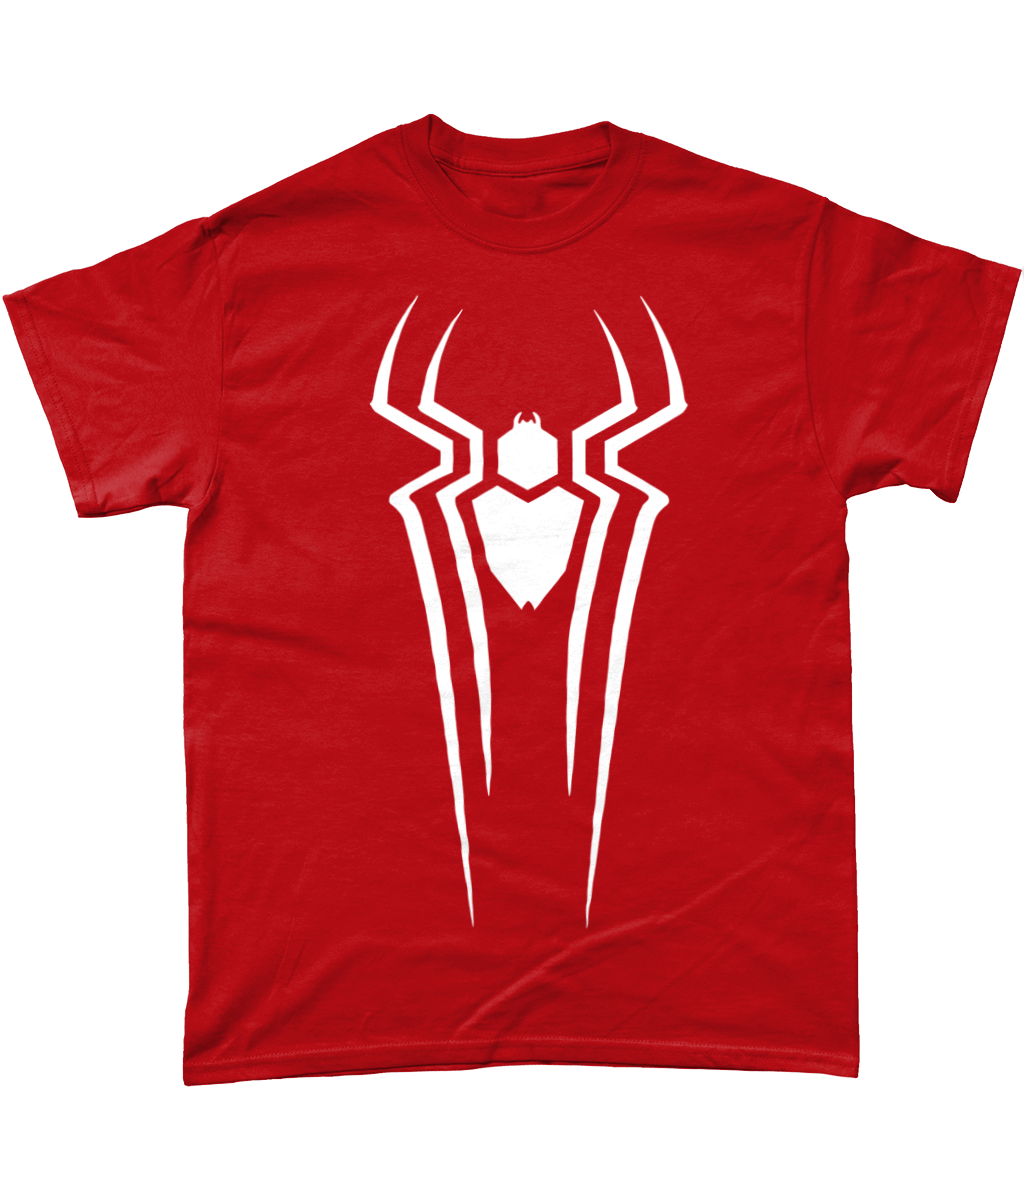 Spider-Man No Way Home Inspired Combination T-Shirt